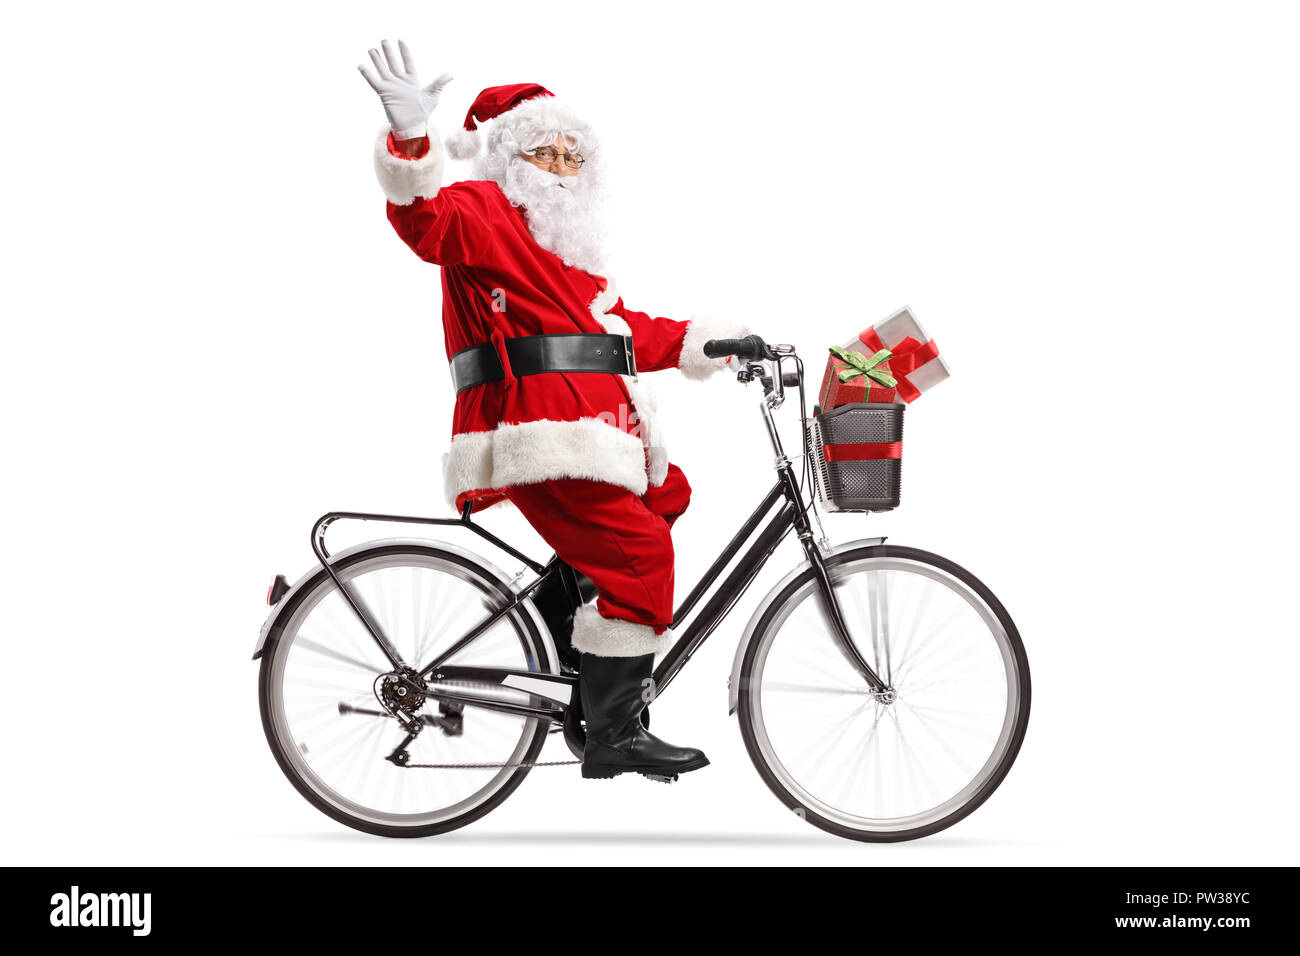 Full length shot of Santa Claus riding a bicycle and waving isolated on white background Stock Photo